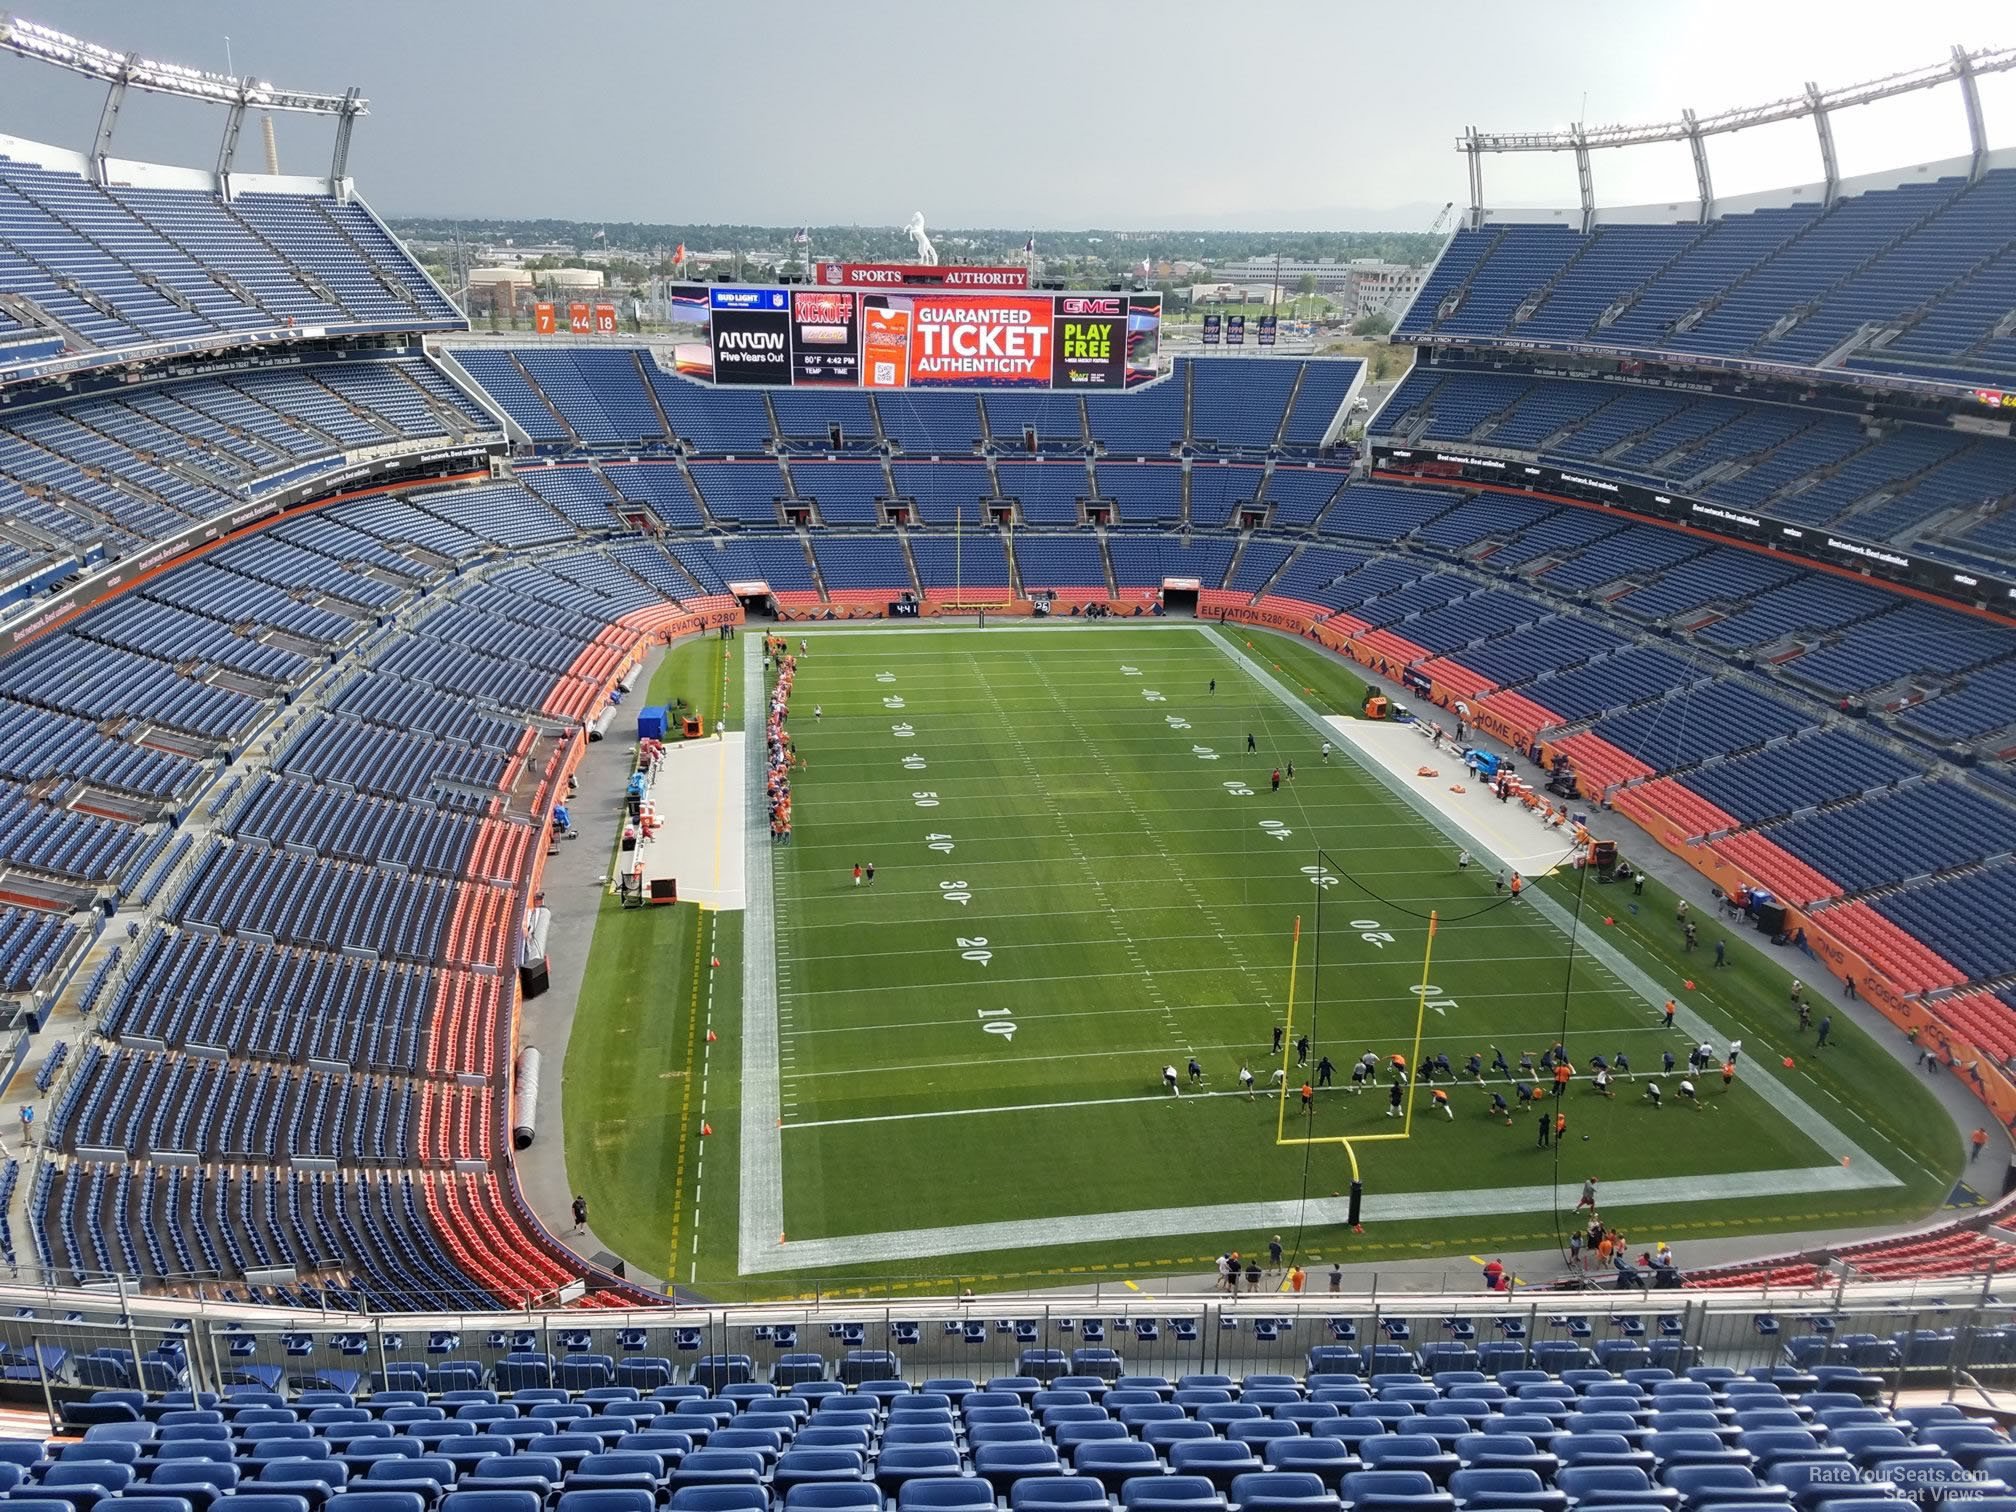 section 523, row 16 seat view  - empower field (at mile high)